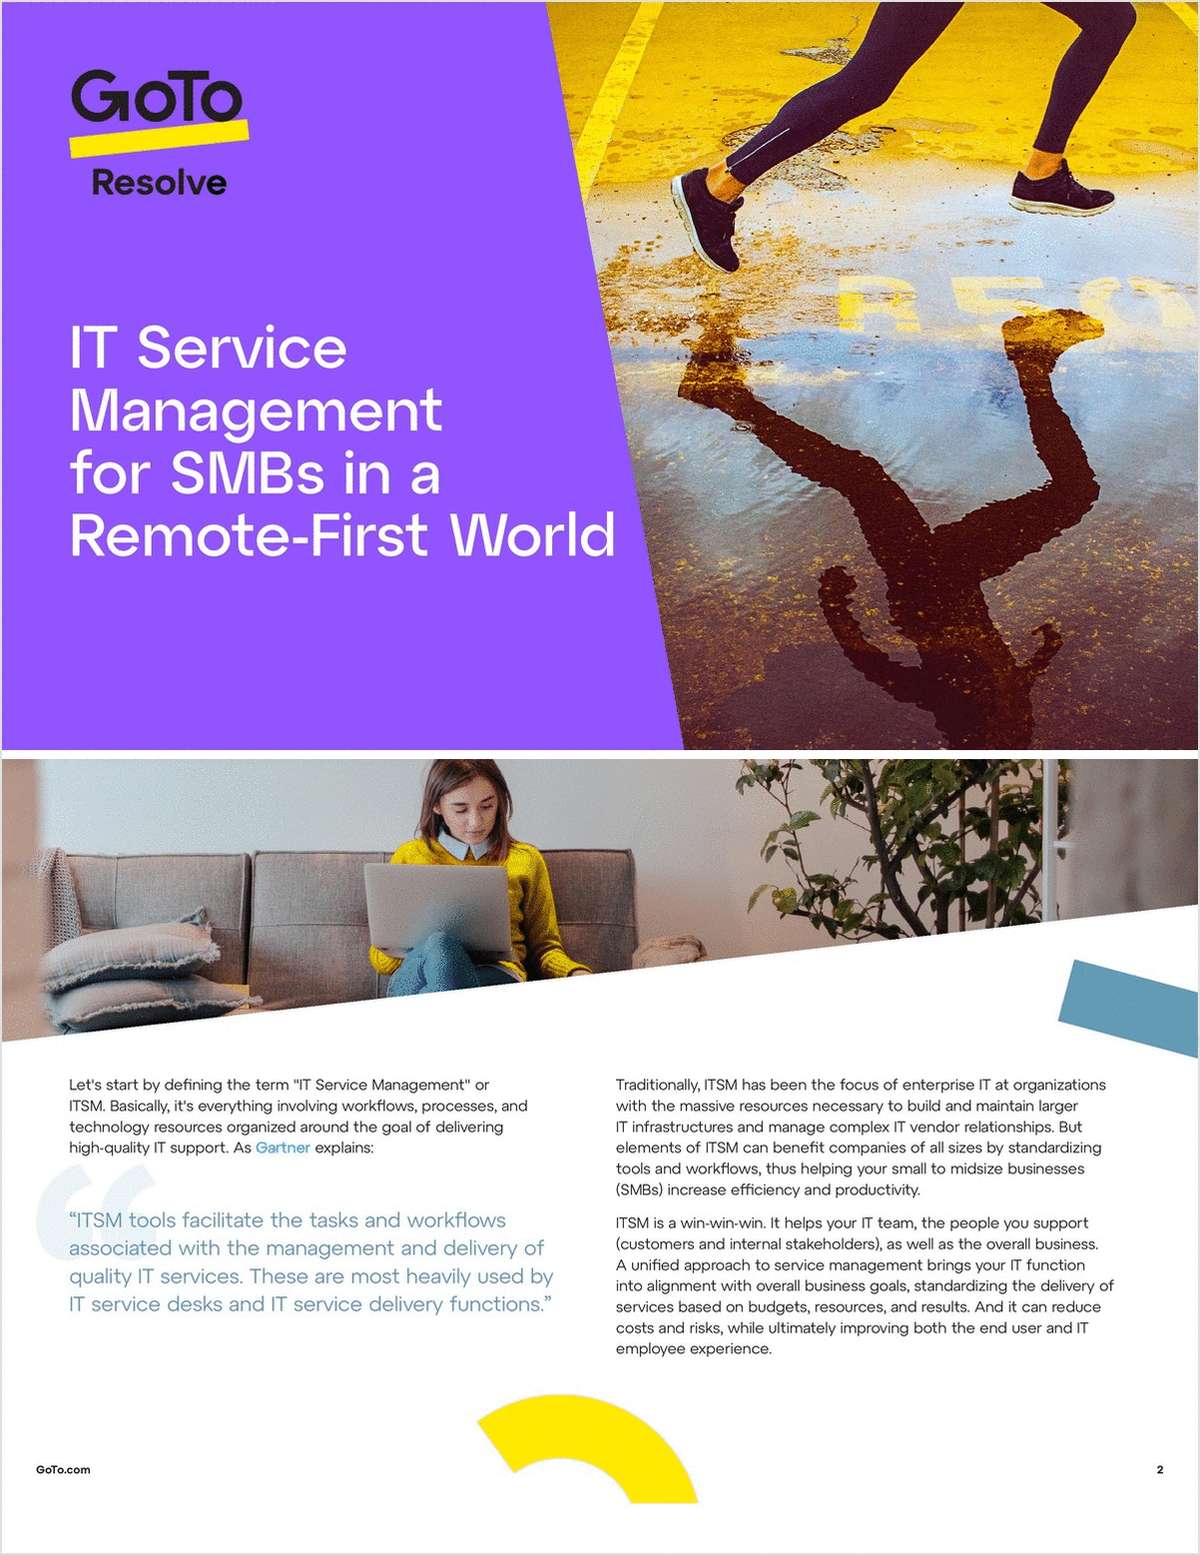 IT Service Management for SMBs in a Remote-First World